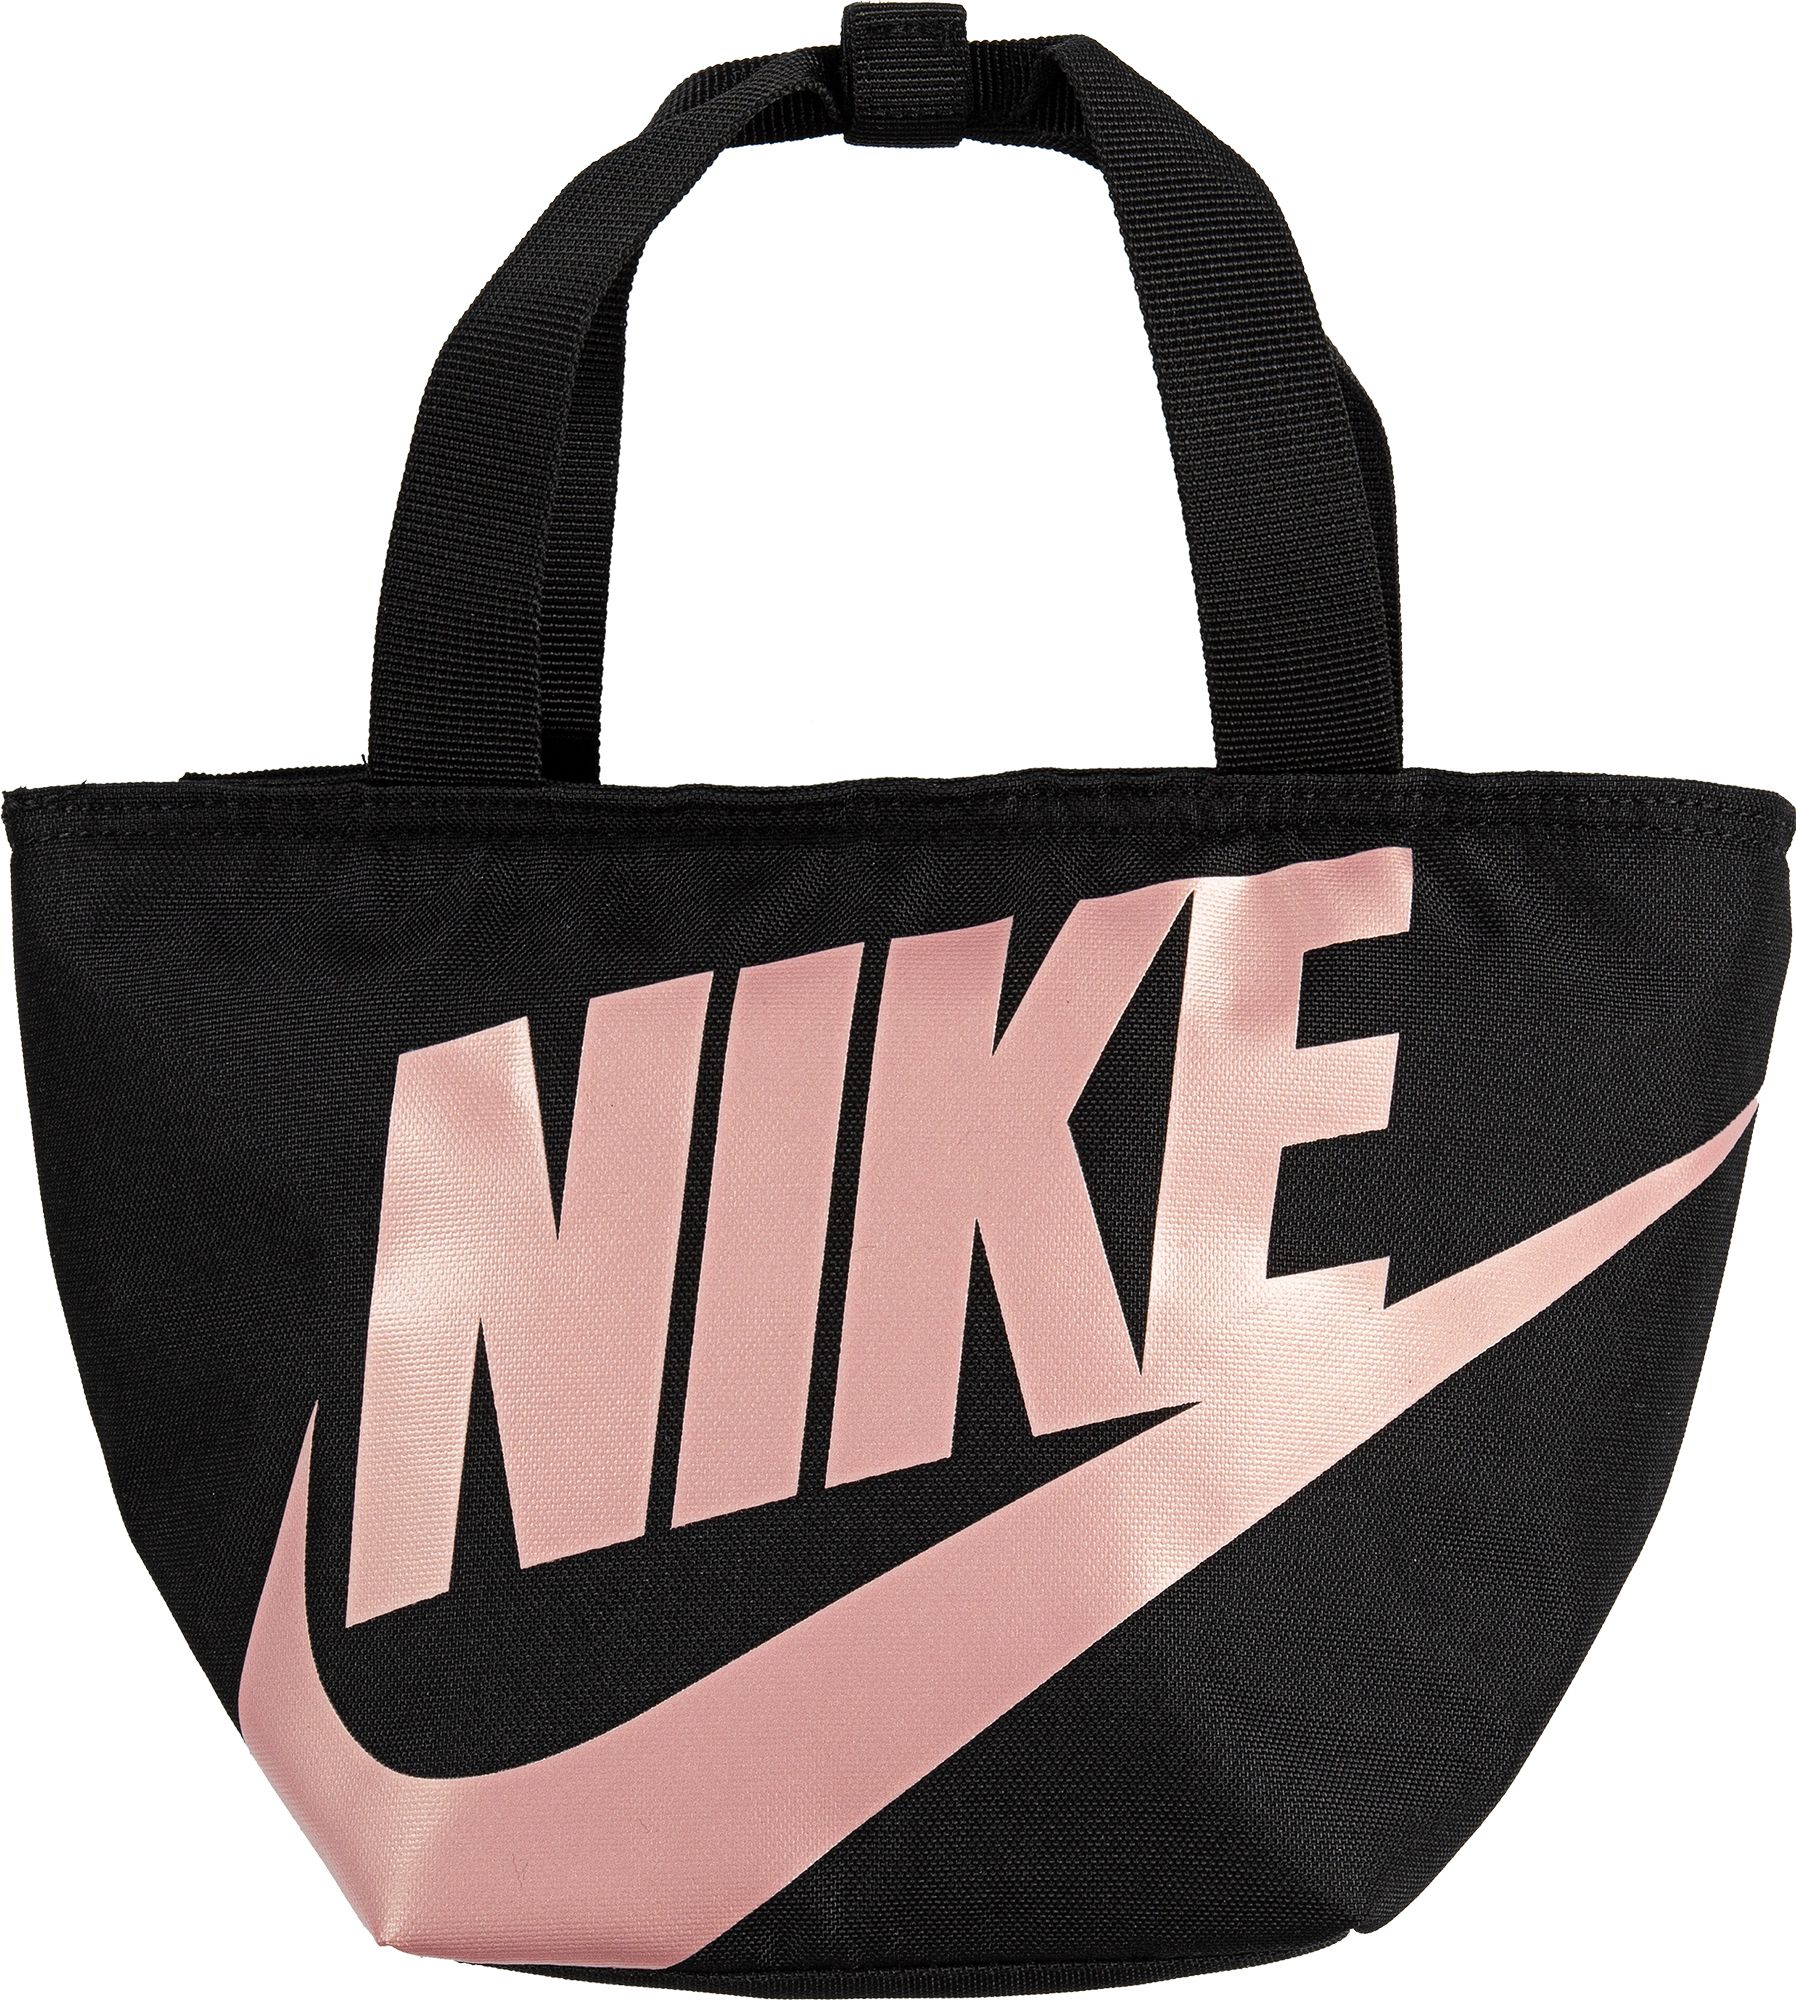 Nike / Futura Fuel Insulated Lunch Tote Bag